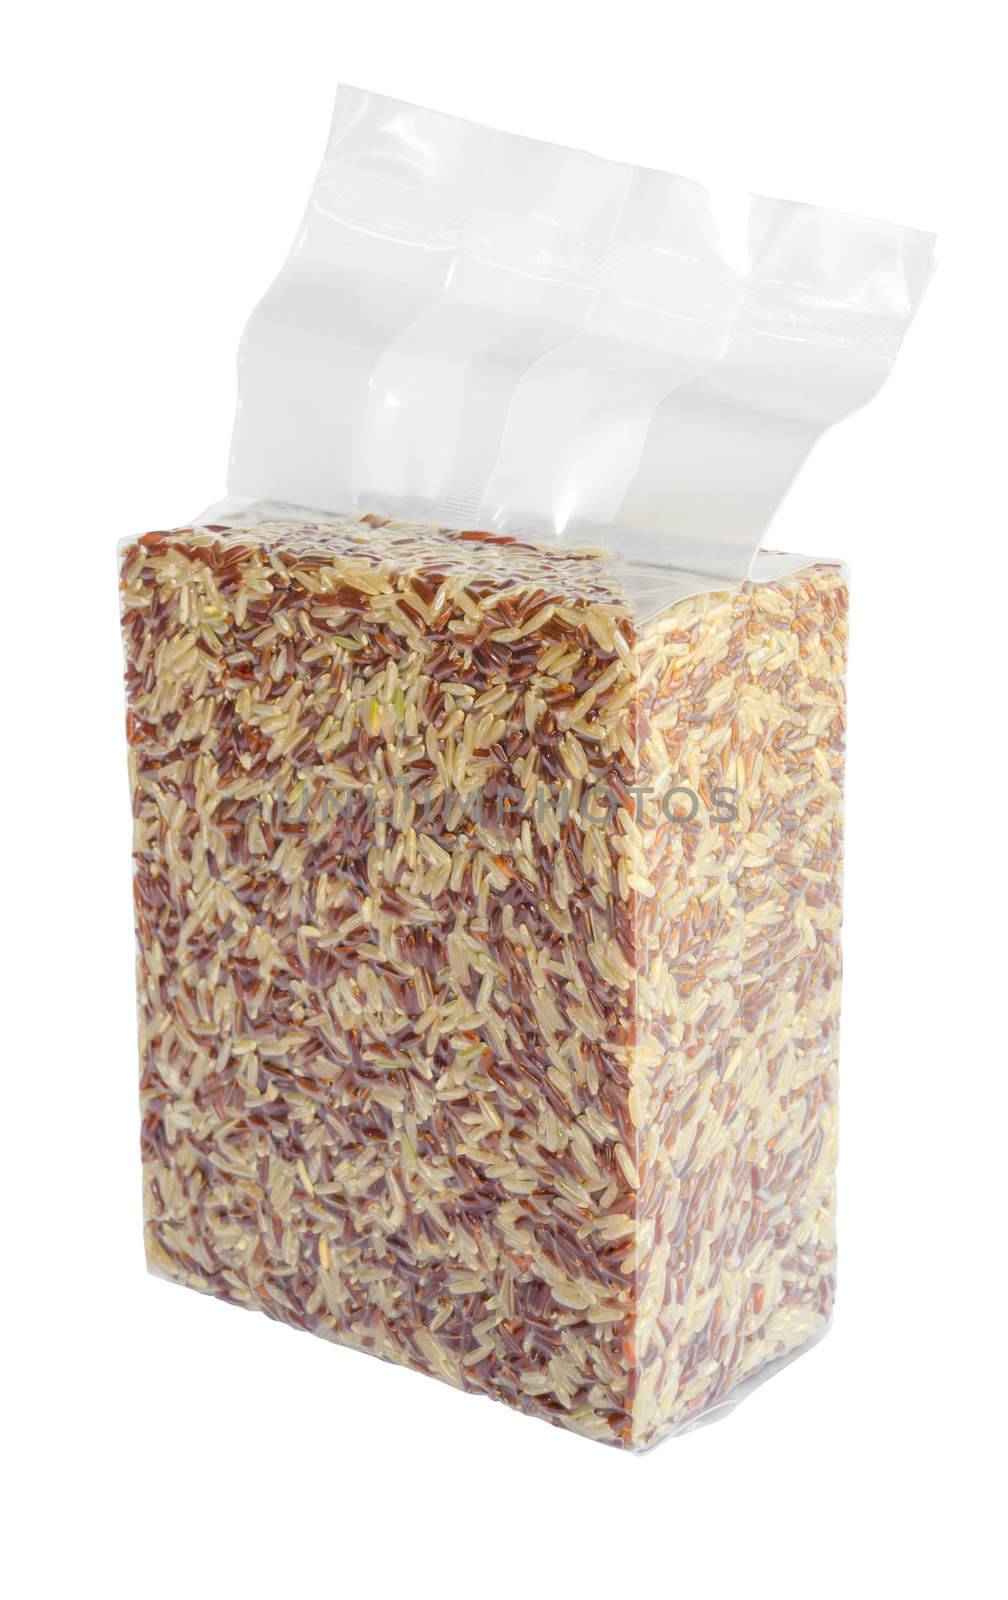 Brown rice in vacuum plastic bag isolated on white background, clipping path 1 Kg.